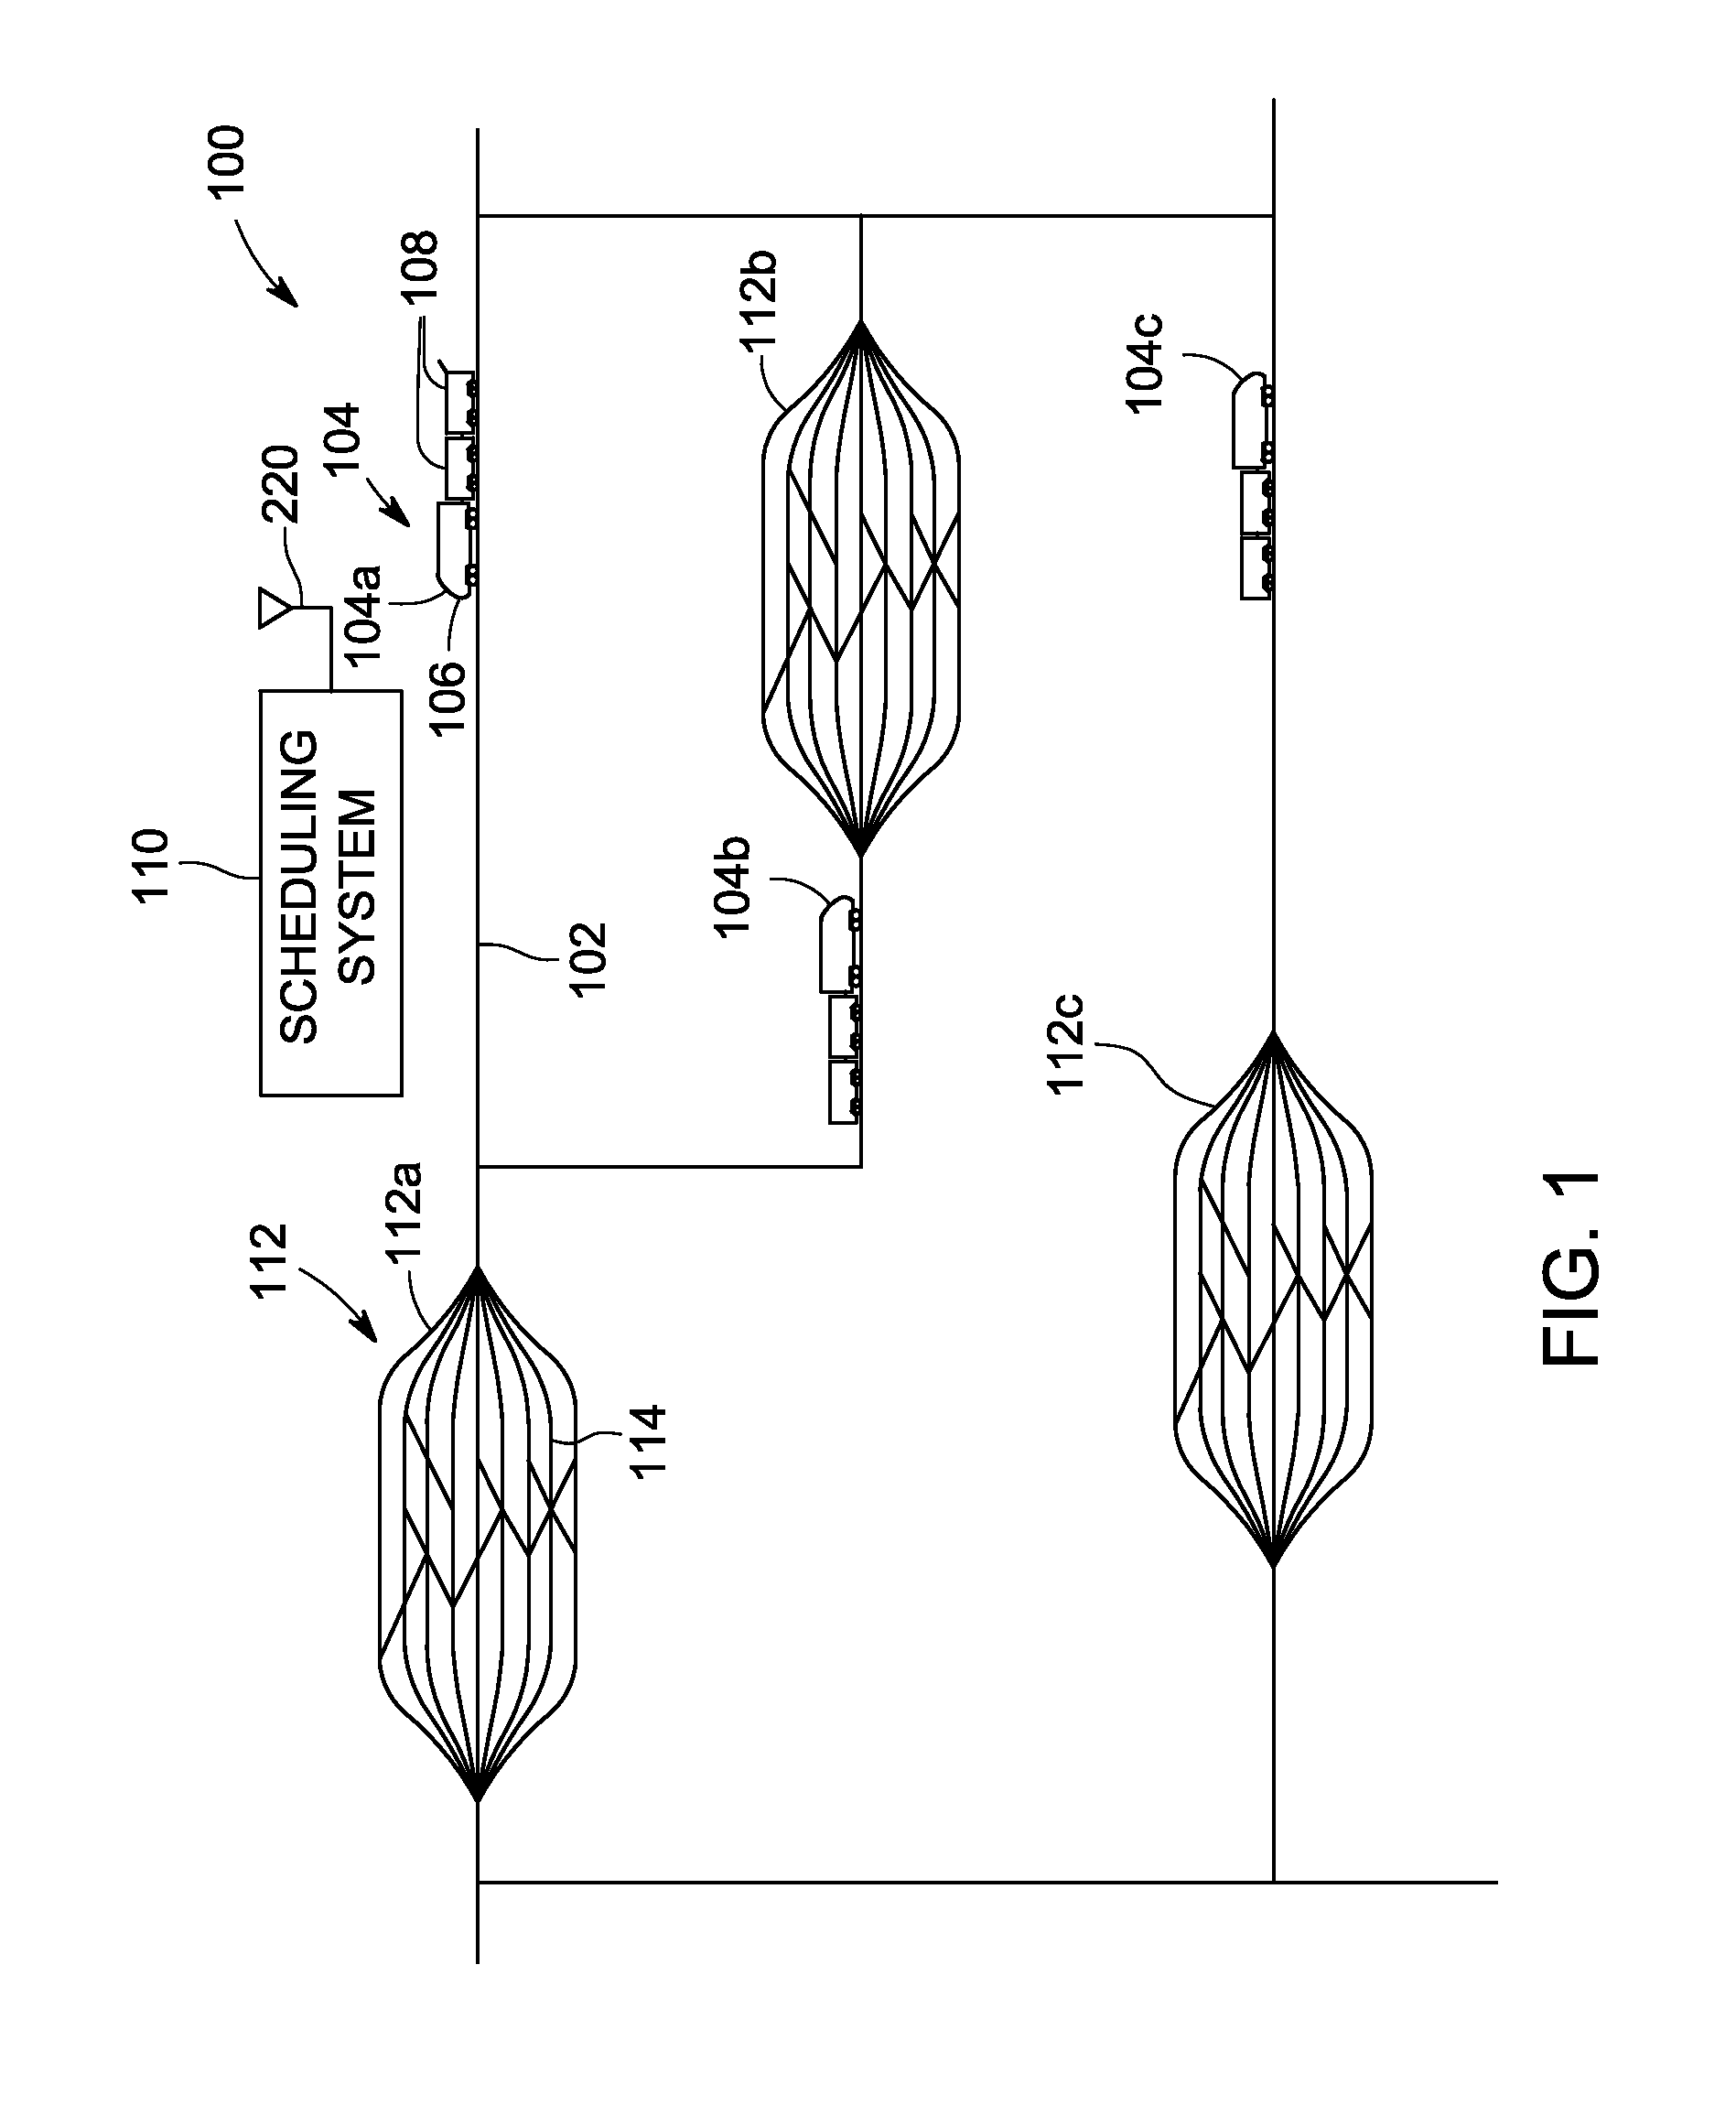 System and method for changing when a vehicle enters a vehicle yard